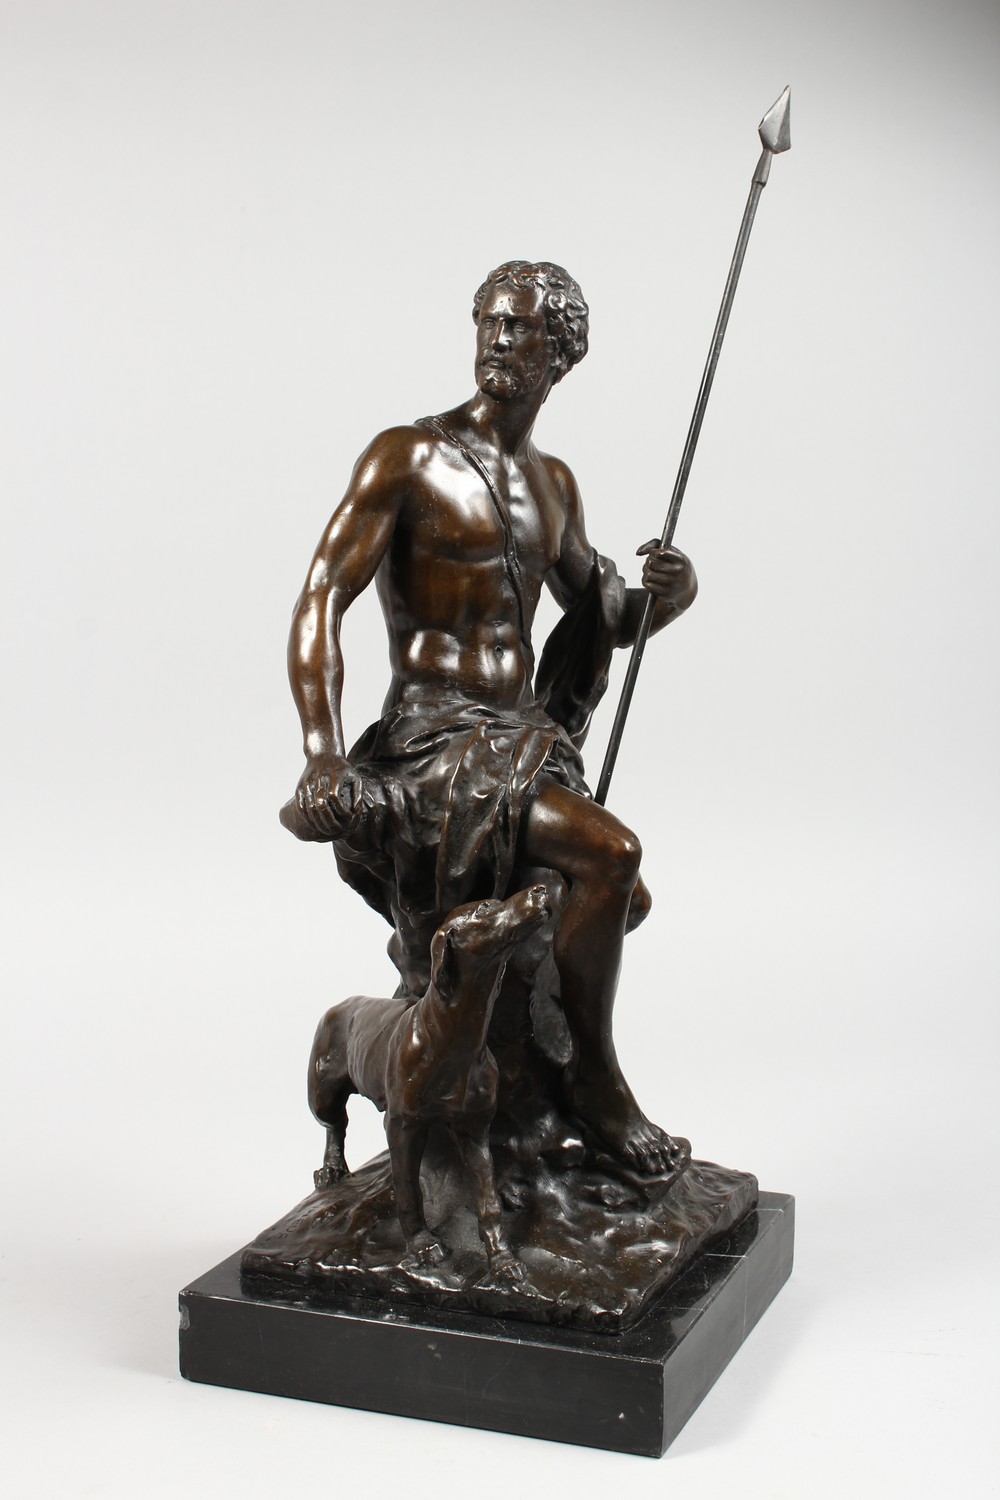 AFTER BONHEUR A LARGE BRONZE FIGURE OF A CLASSICAL MAN holding a spear, a dog by his side. Signed, - Image 4 of 9